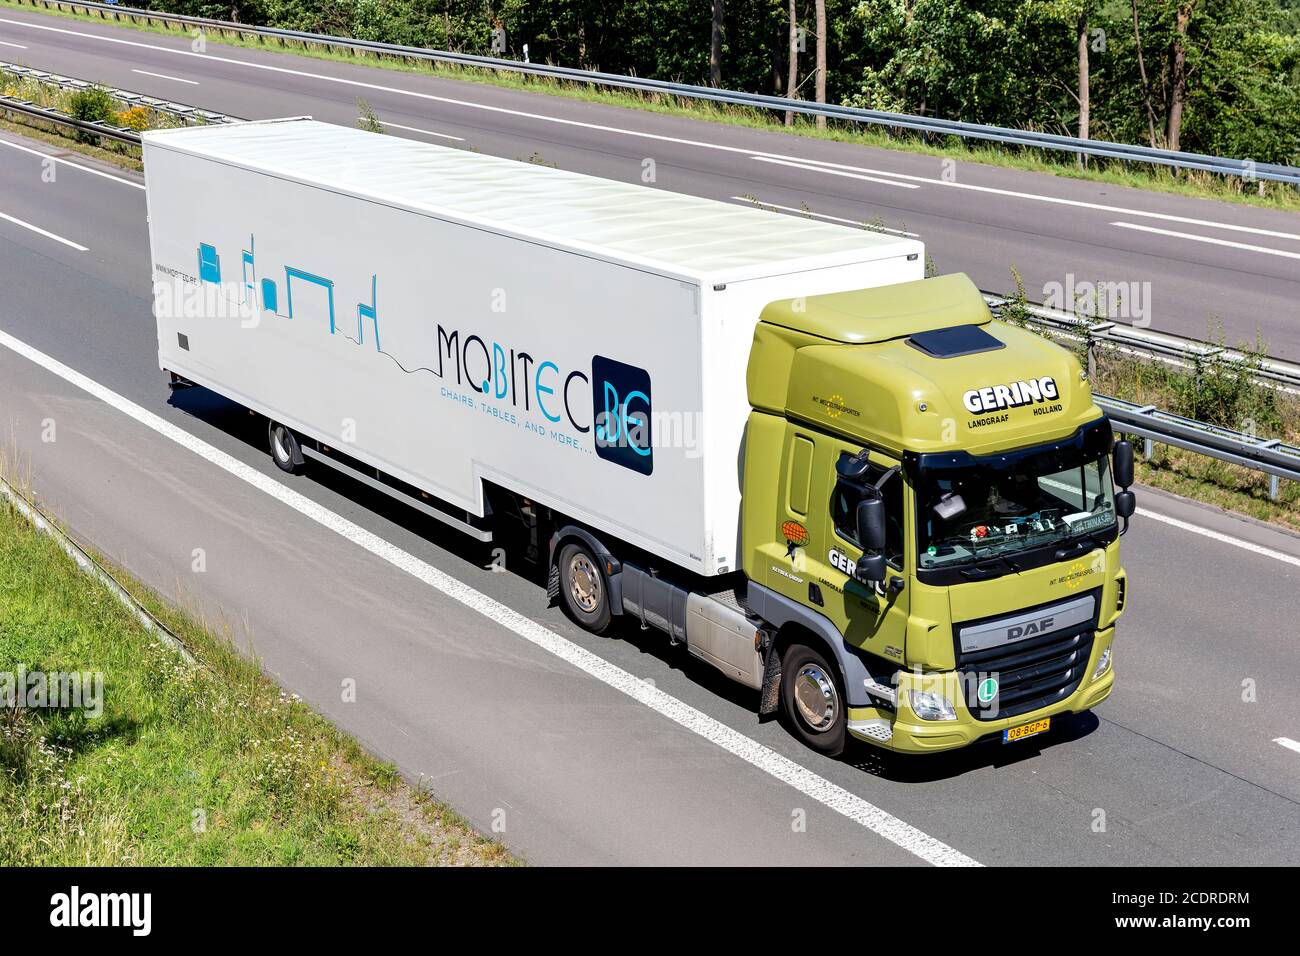 Gering DAF CF truck with Mobitec box trailer on motorway. Stock Photo